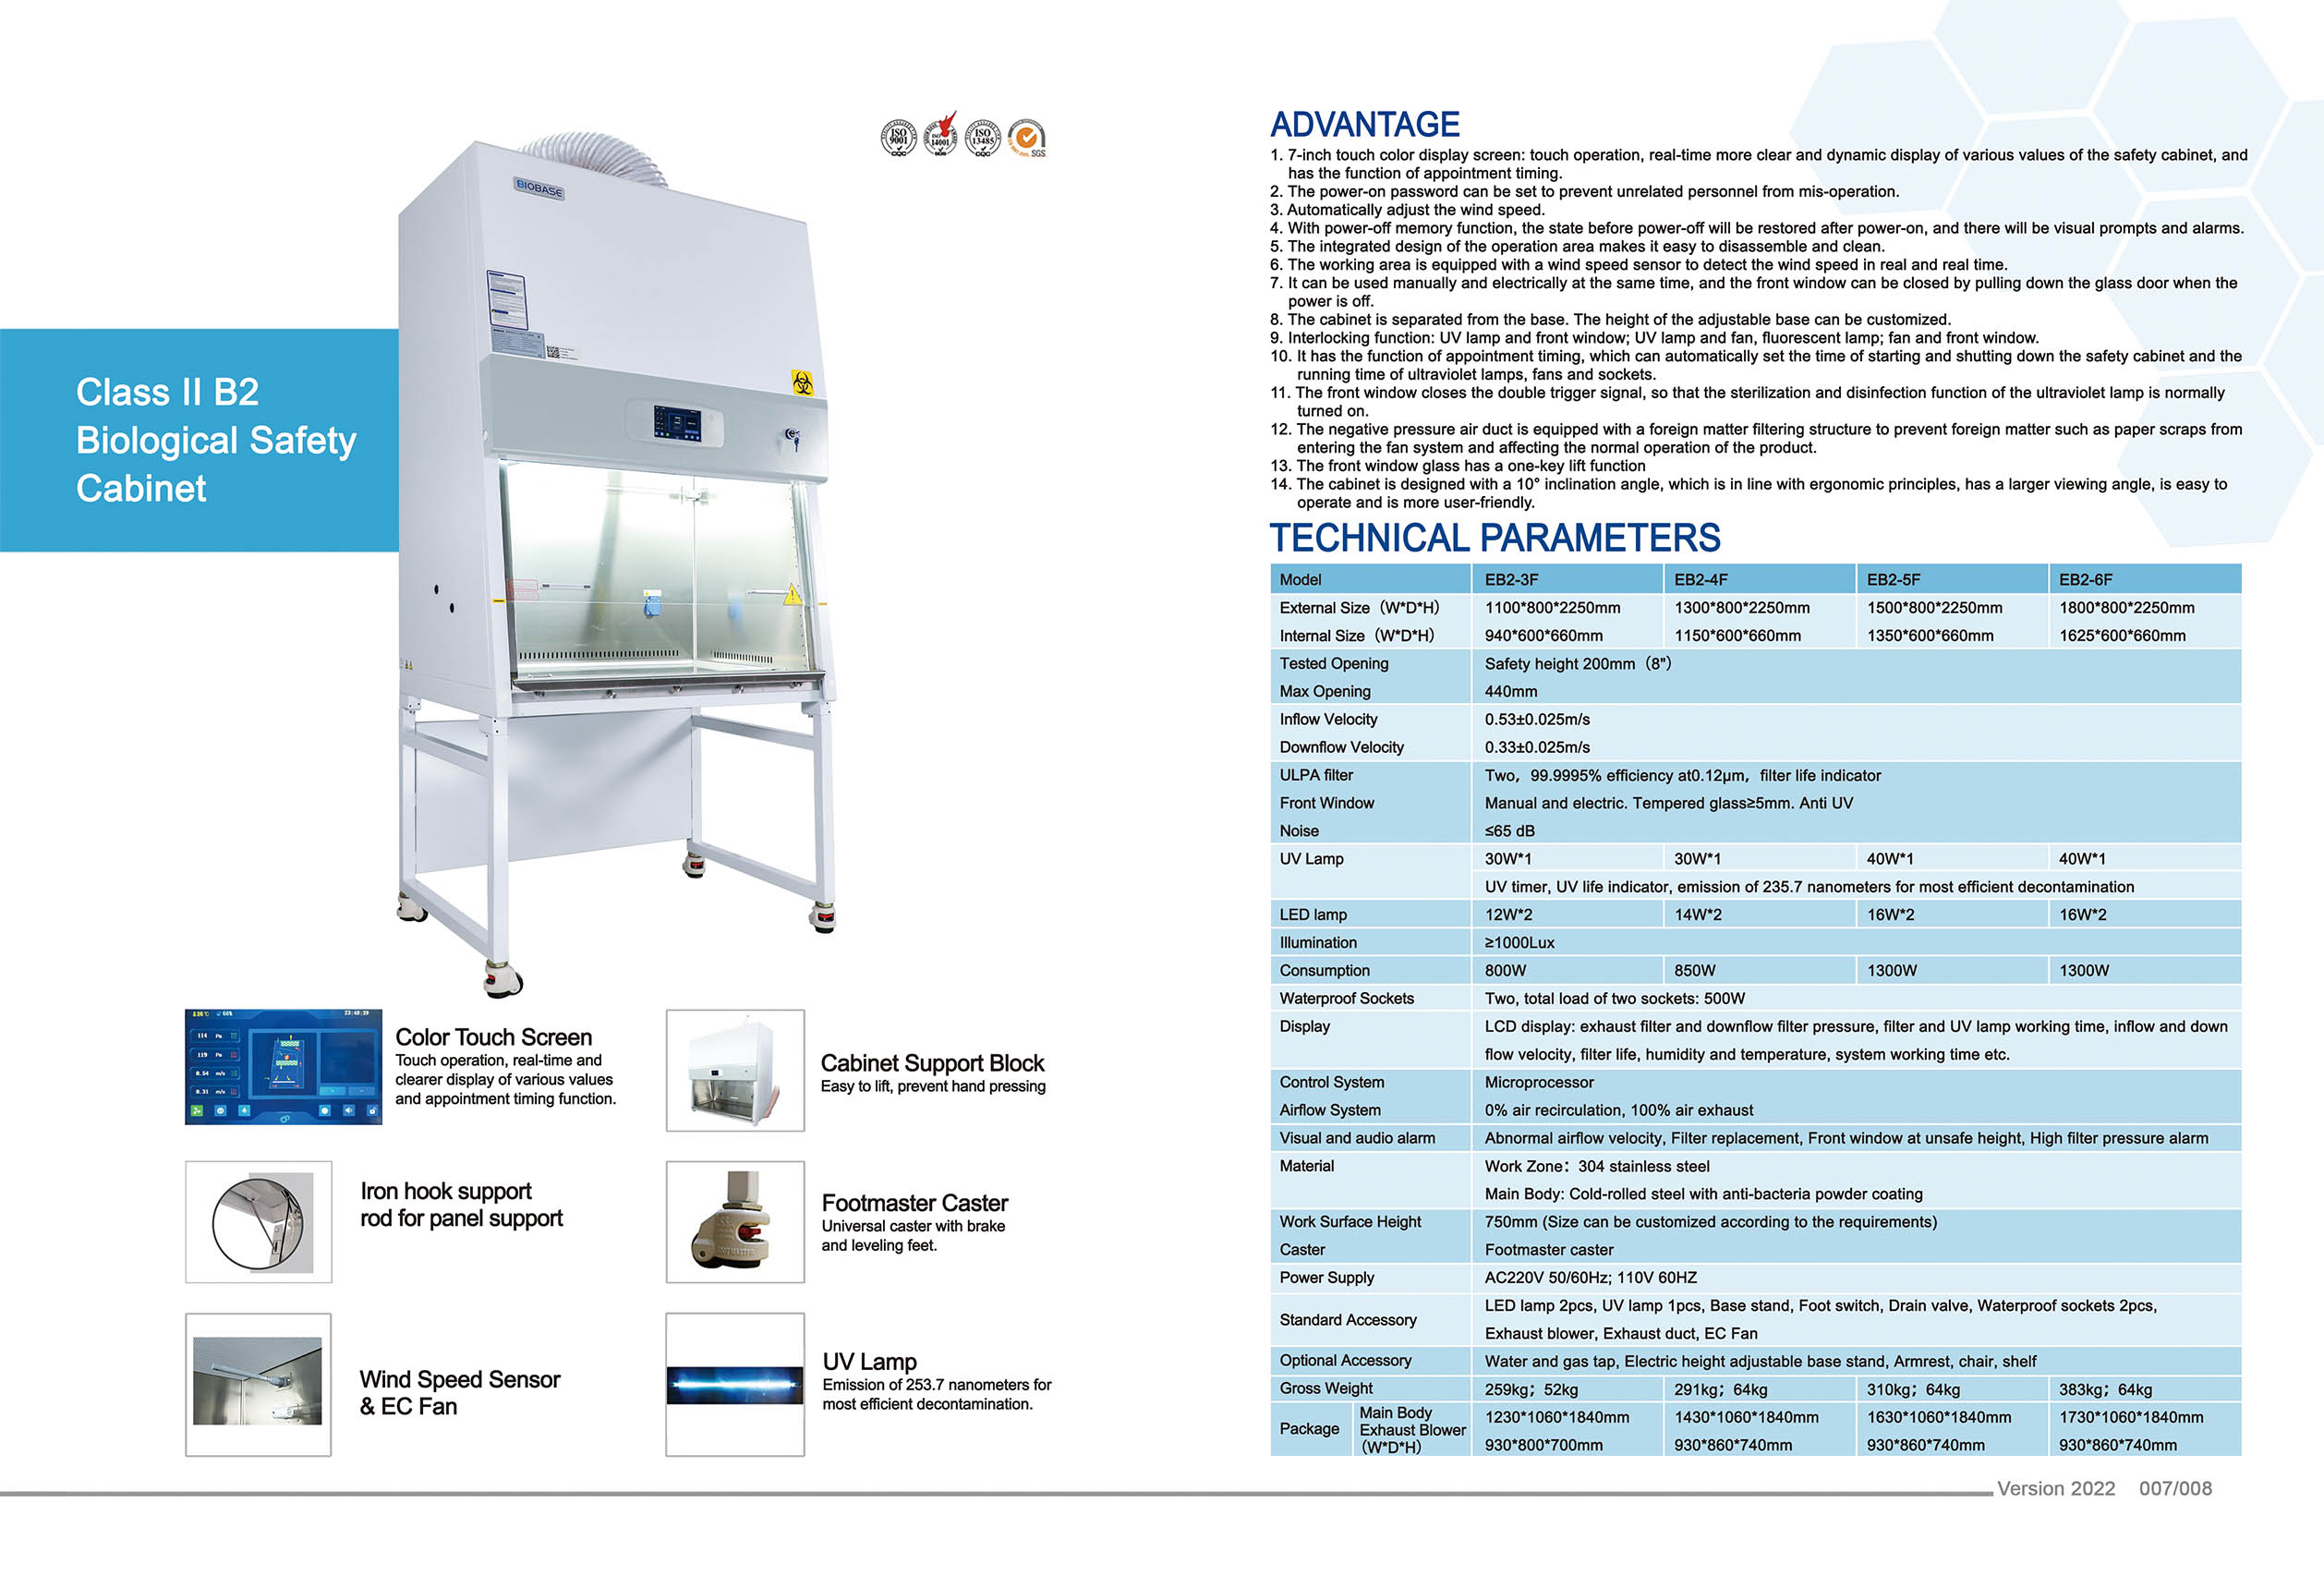 Class Ii B2 Biological Safety Cabinet